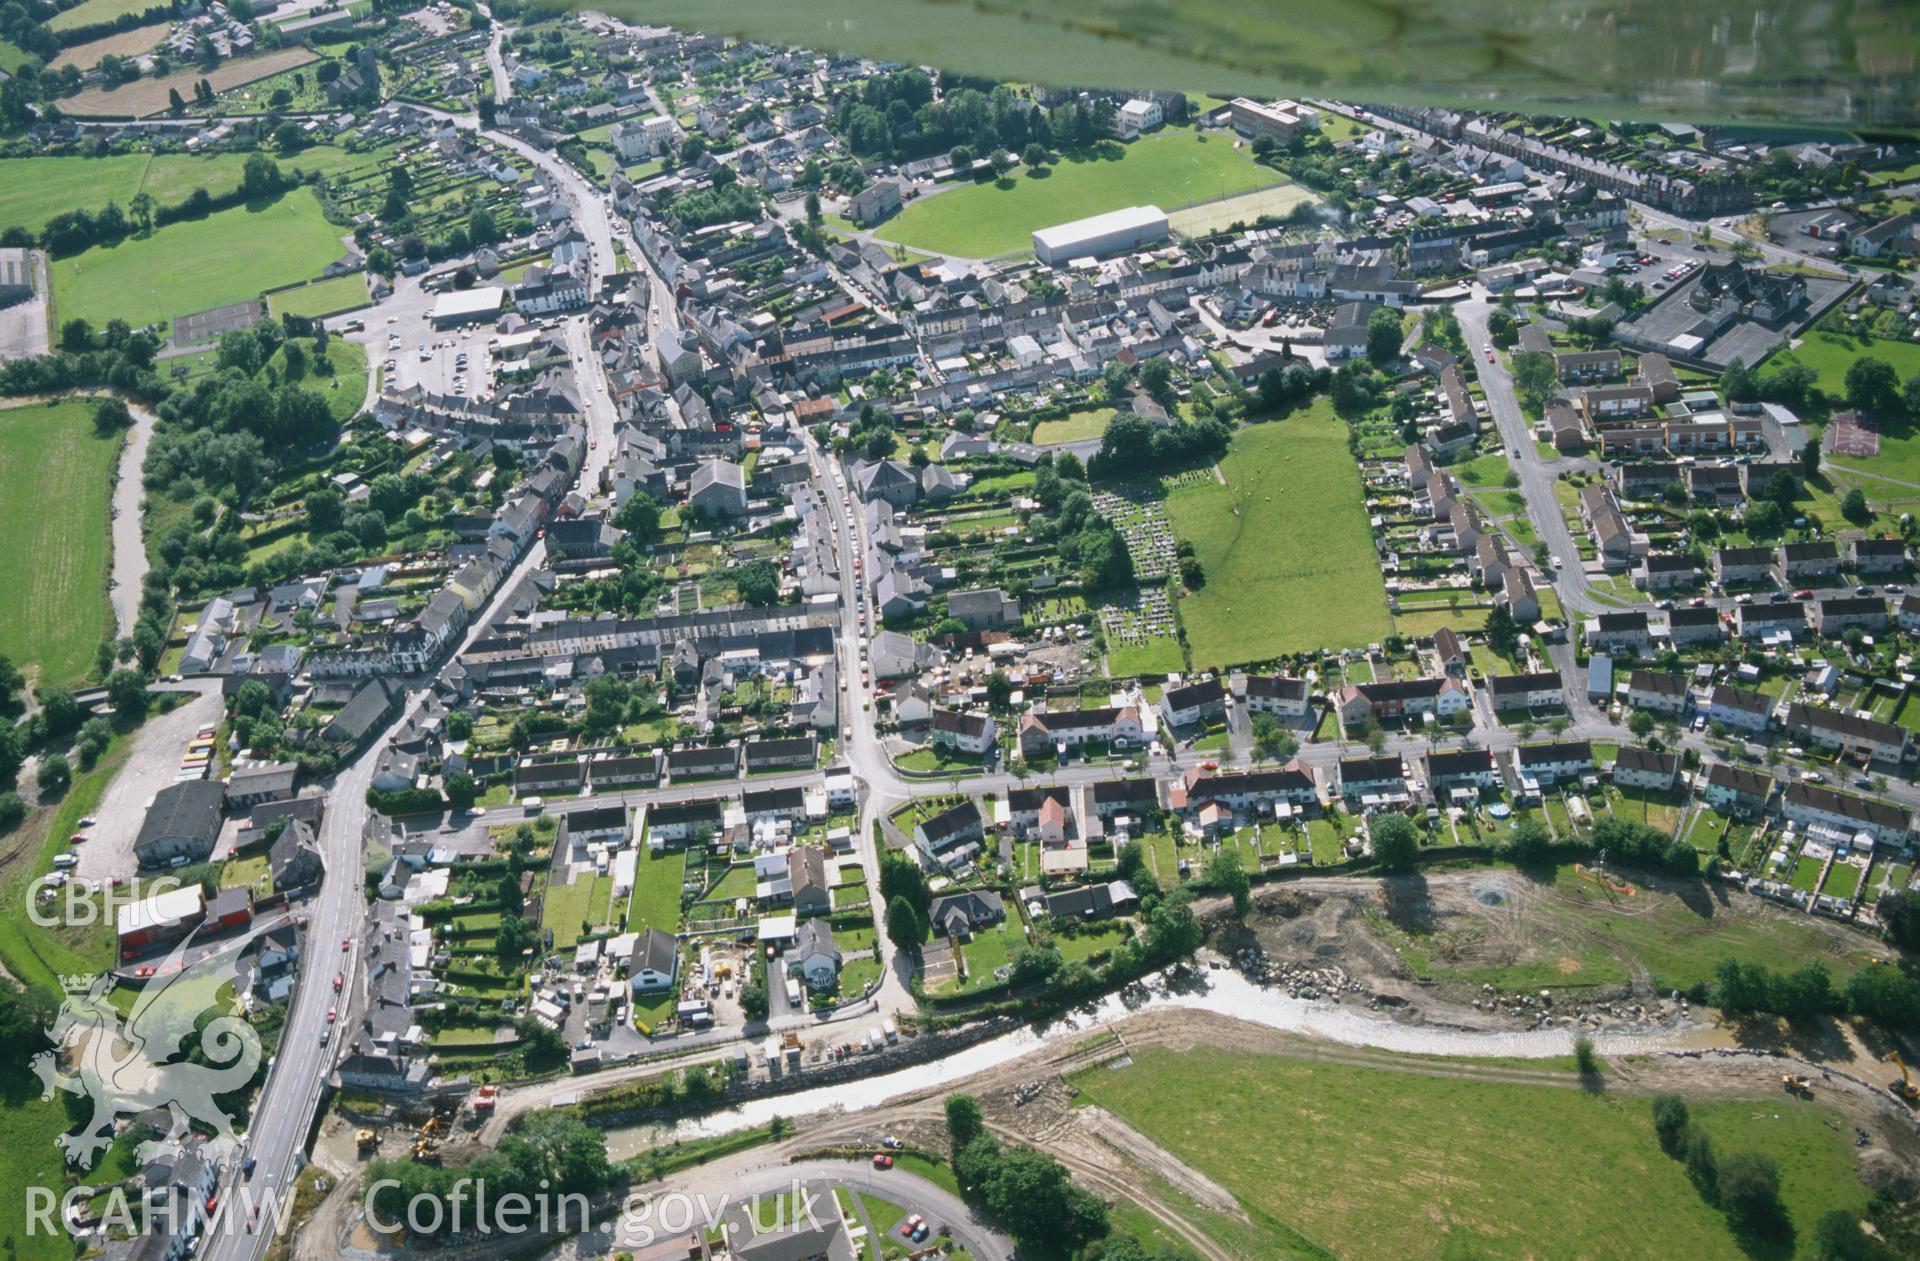 RCAHMW colour oblique aerial photograph of Llandovery. Taken by Toby Driver on 15/07/2002